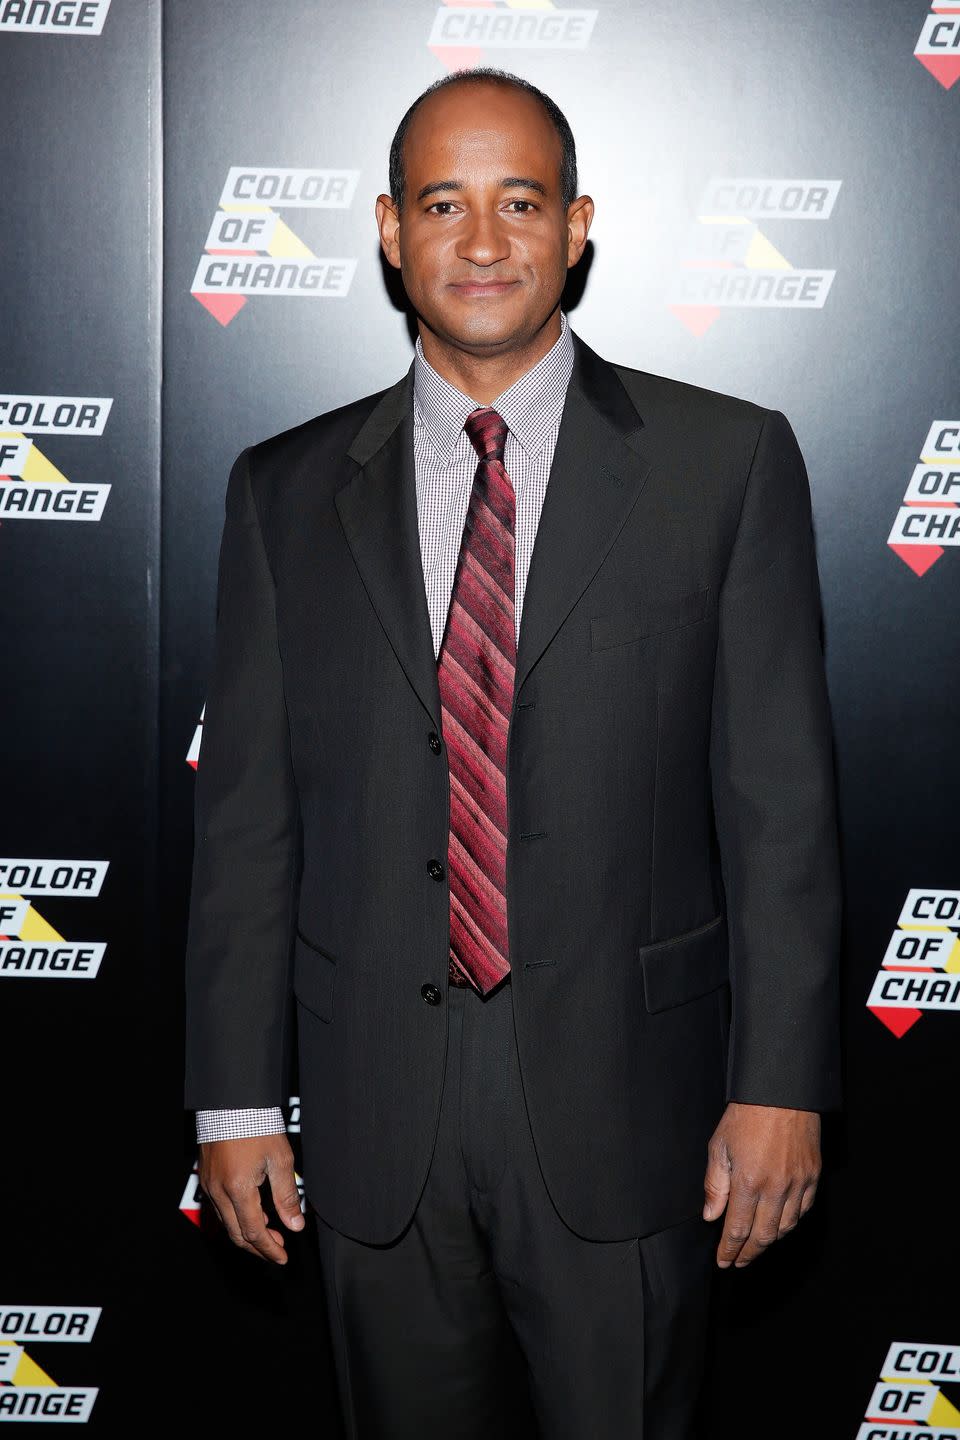 james rucker smiles at the camera while standing in a black suit, checkered shirt and red striped tie, he is in front of a black background with color of change logos